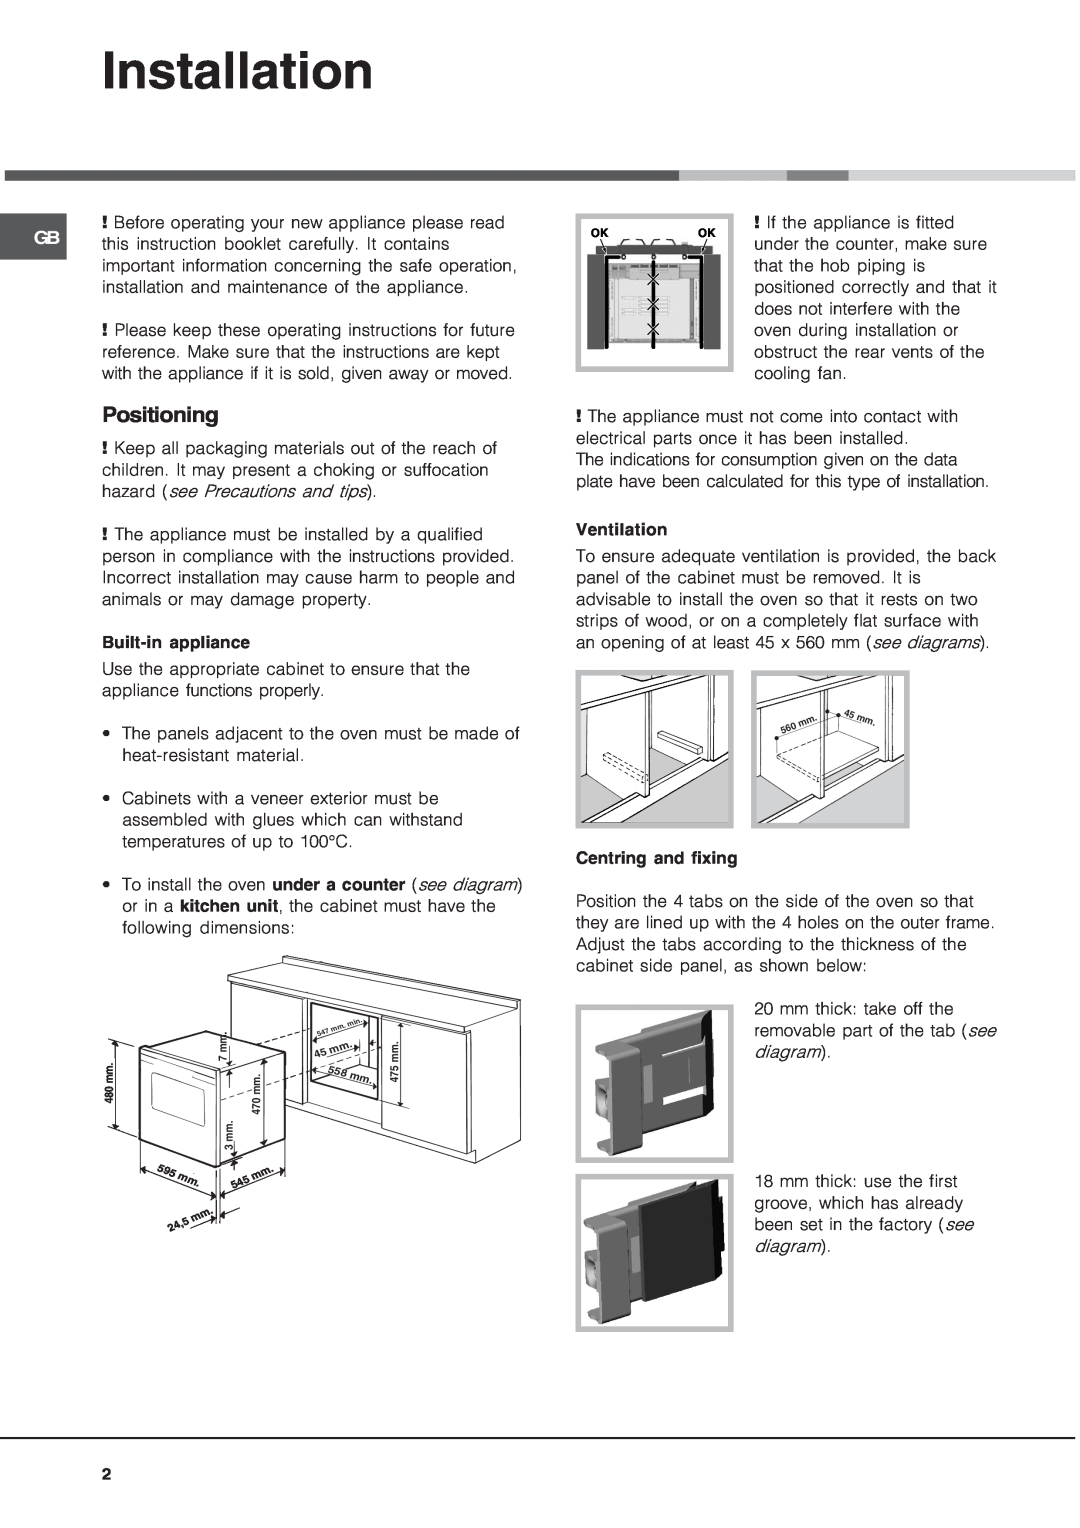 Hotpoint SE48101PGX, Oven, SE48101PX operating instructions Installation, Positioning 